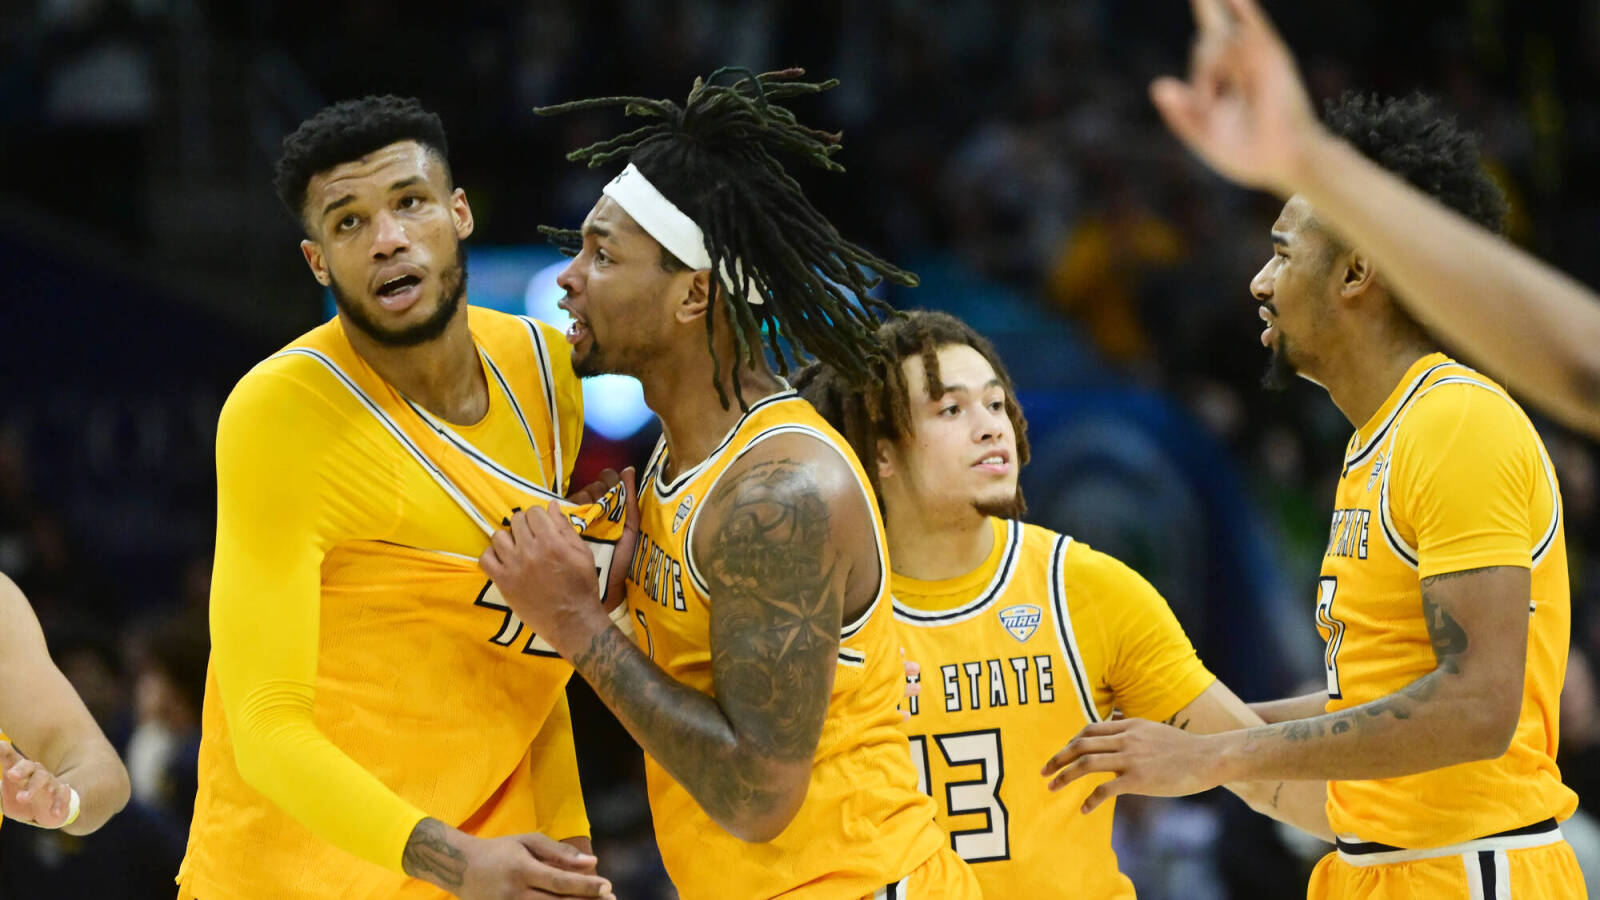 Watch: Kent State loses MAC championship and NCAA tournament bid in worst way possible